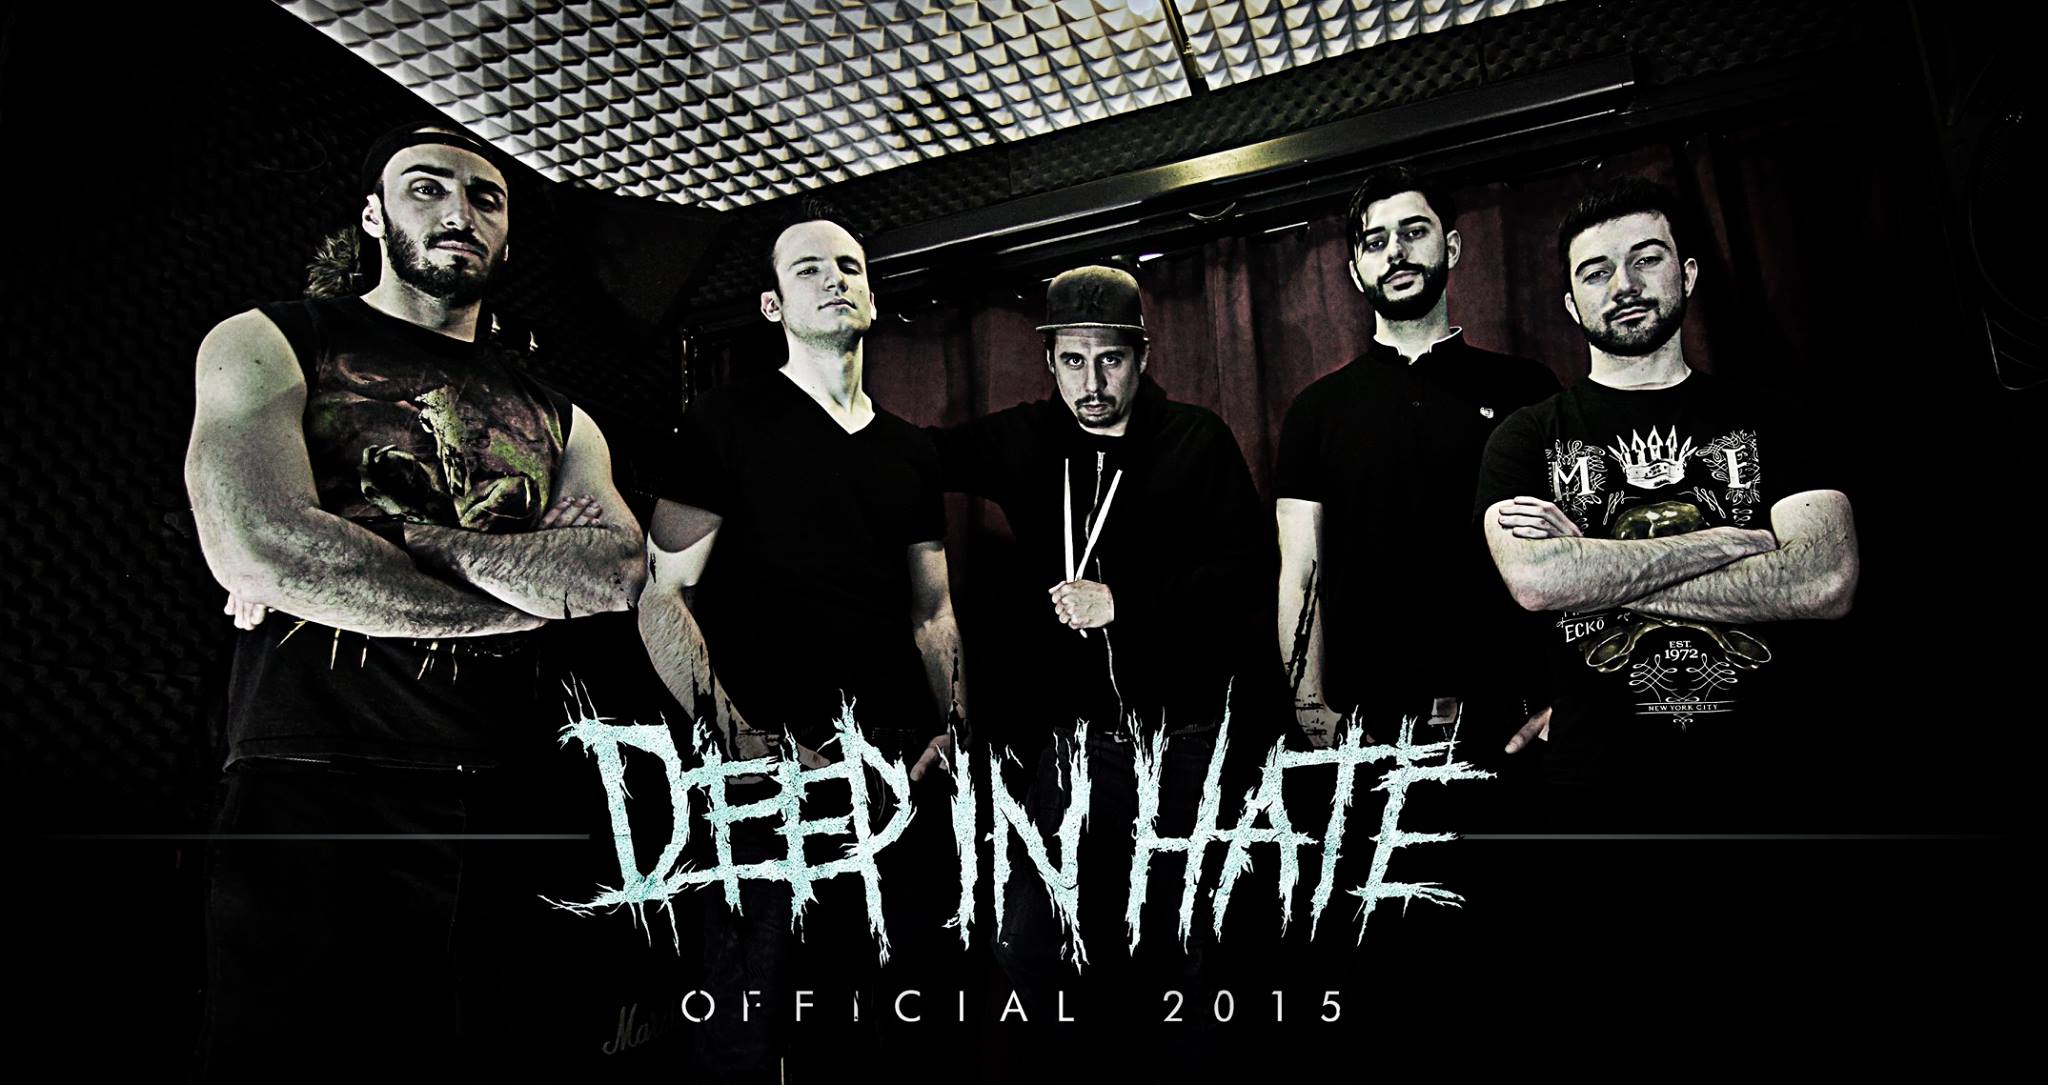 deep in hate - chronicles - pic